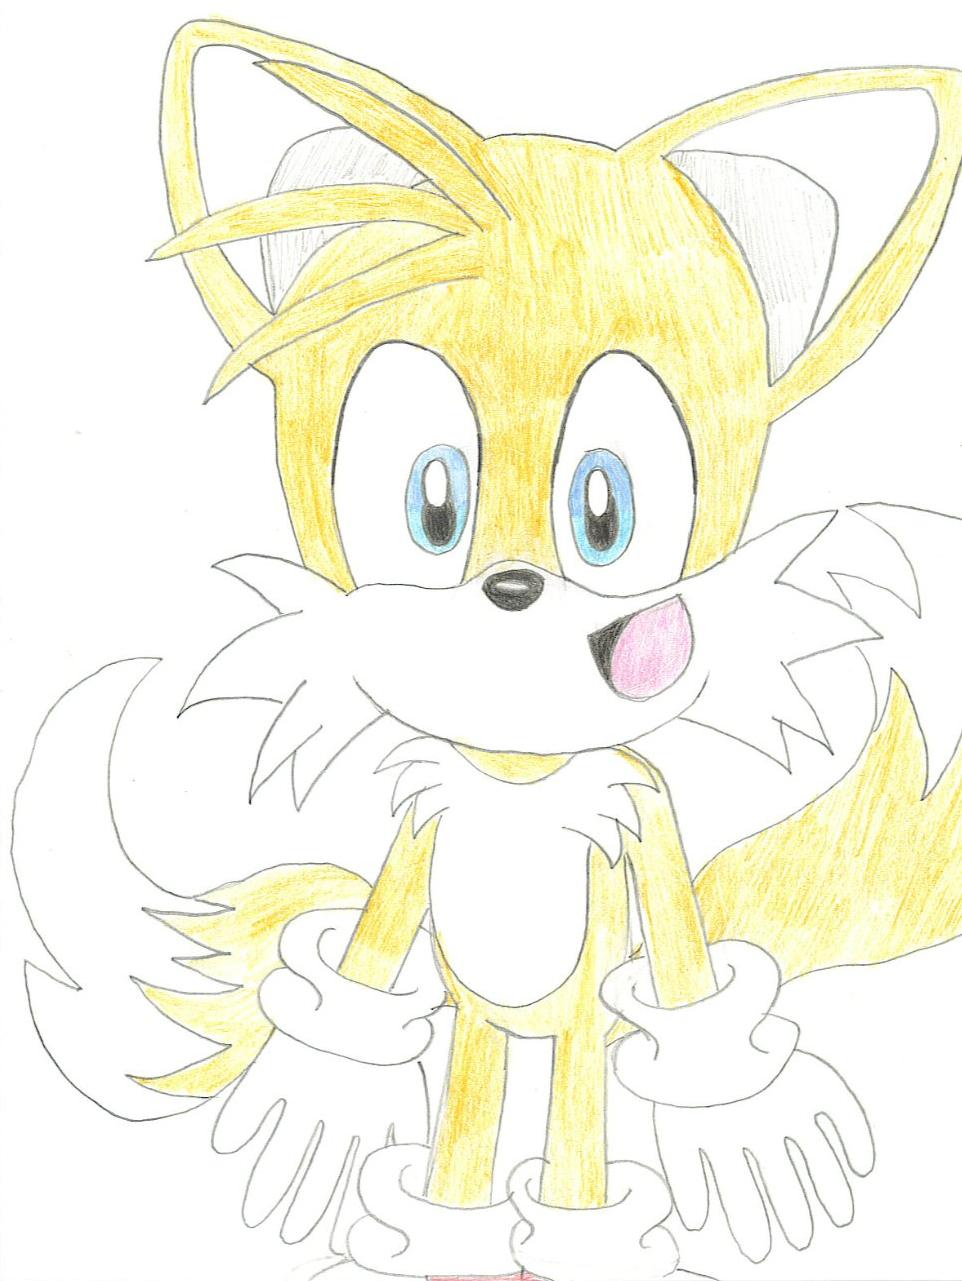 entry for ULFSTH's contest (Tails!) by sonicsusie